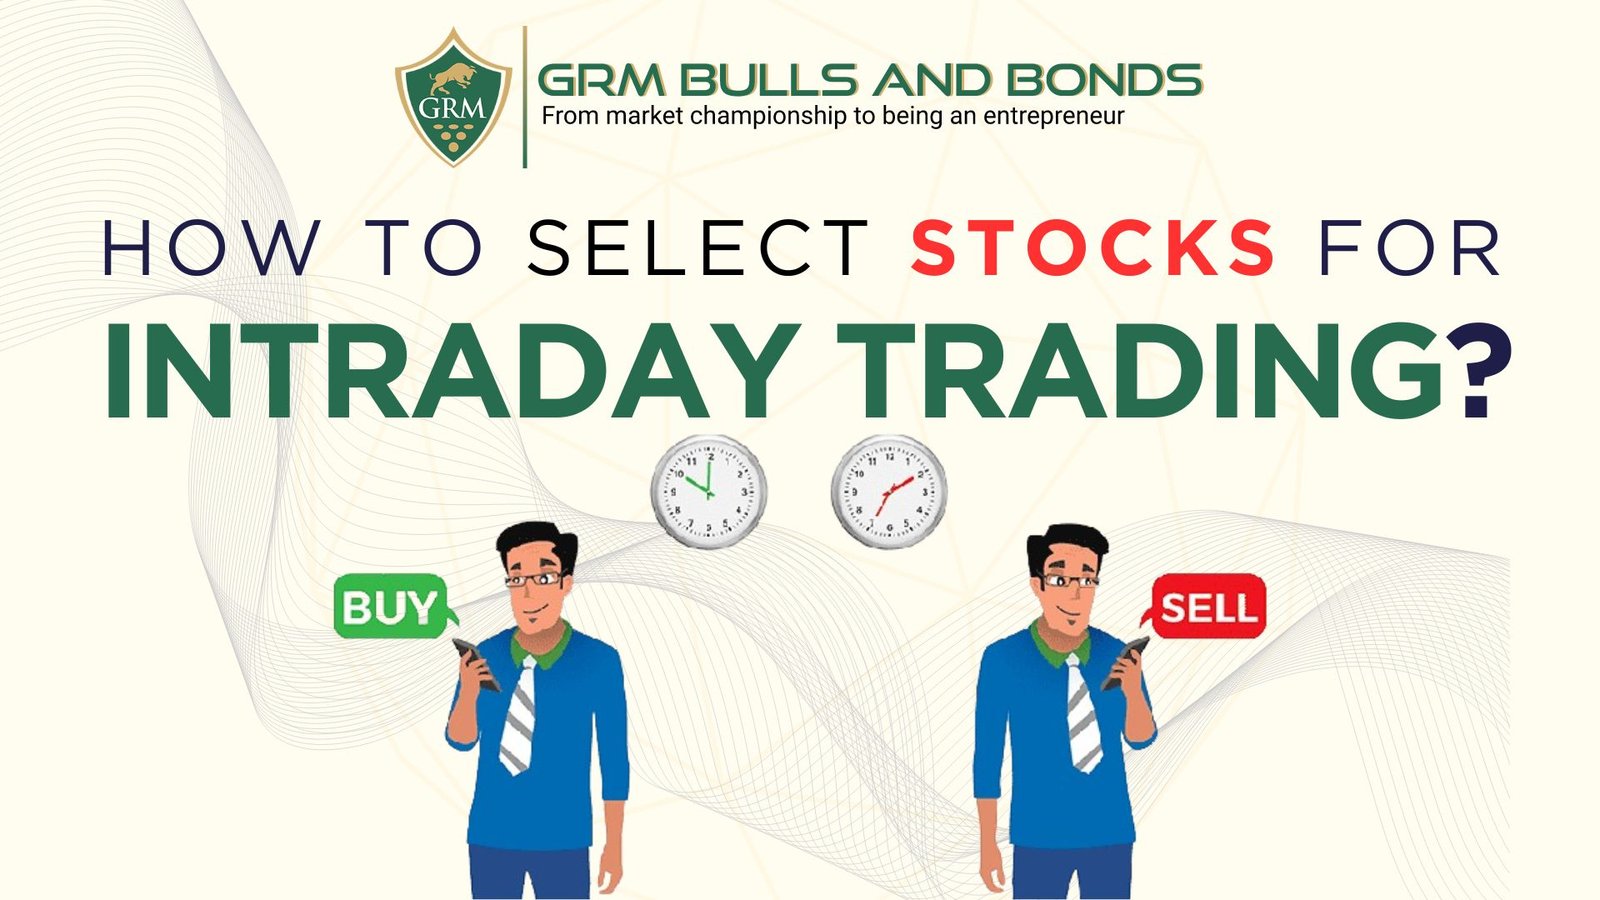 How-to select stocks for intraday trading